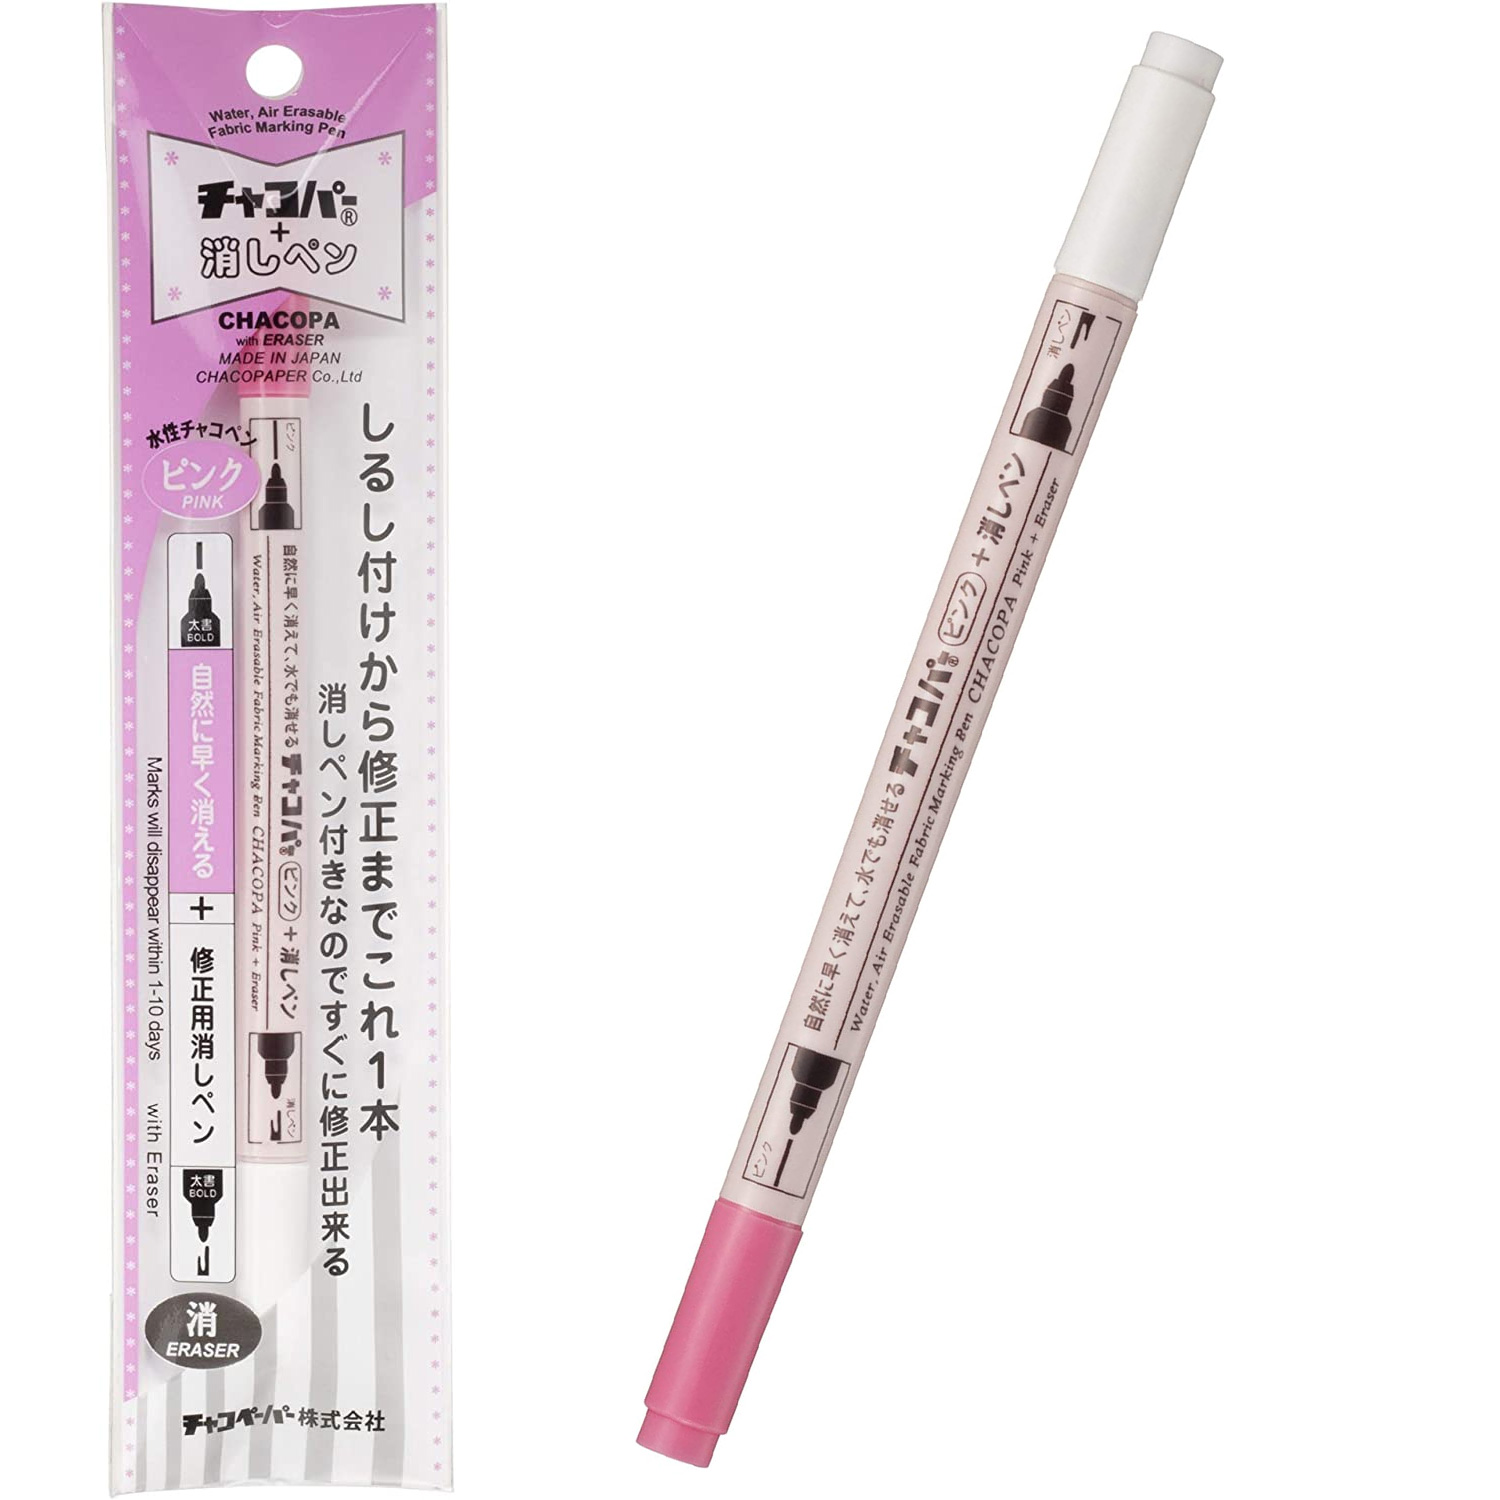 F11-PK Water-based Chaco Pen Chacopa + Eraser Pen pink, length 14cm (pcs)